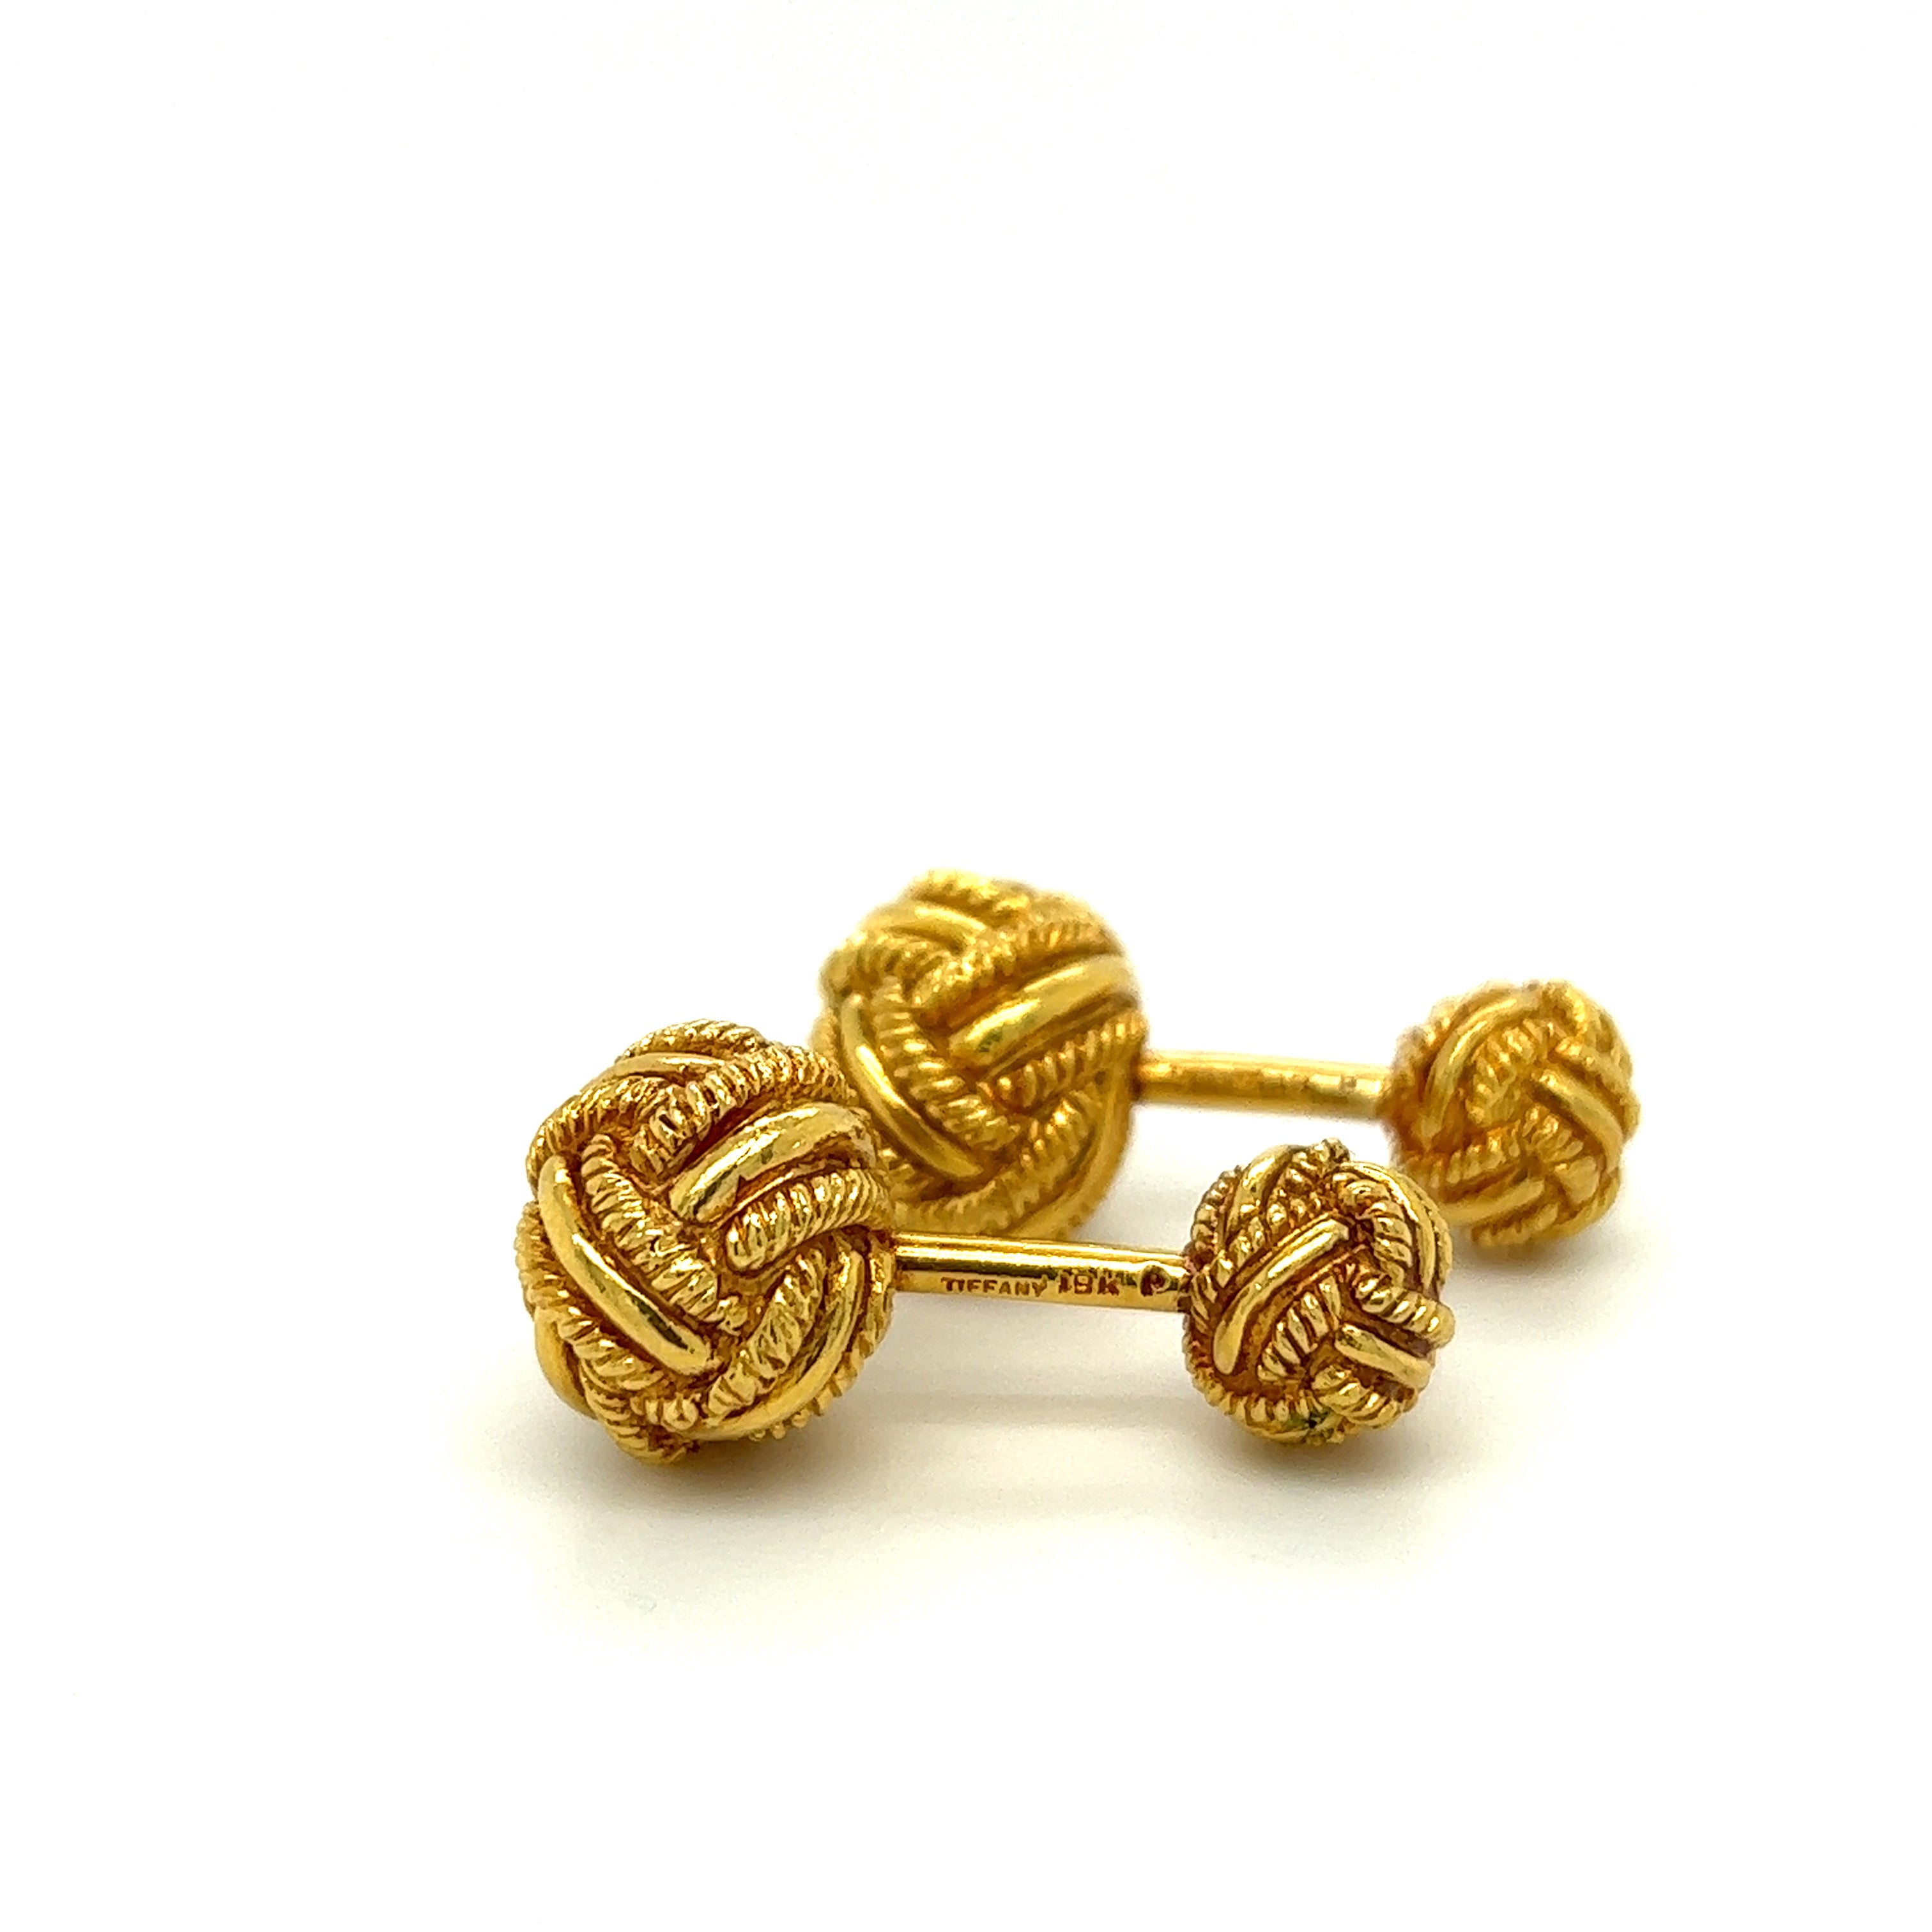 Tiffany & Co Schlumberger Woven Knot Cufflinks in k Yellow Gold